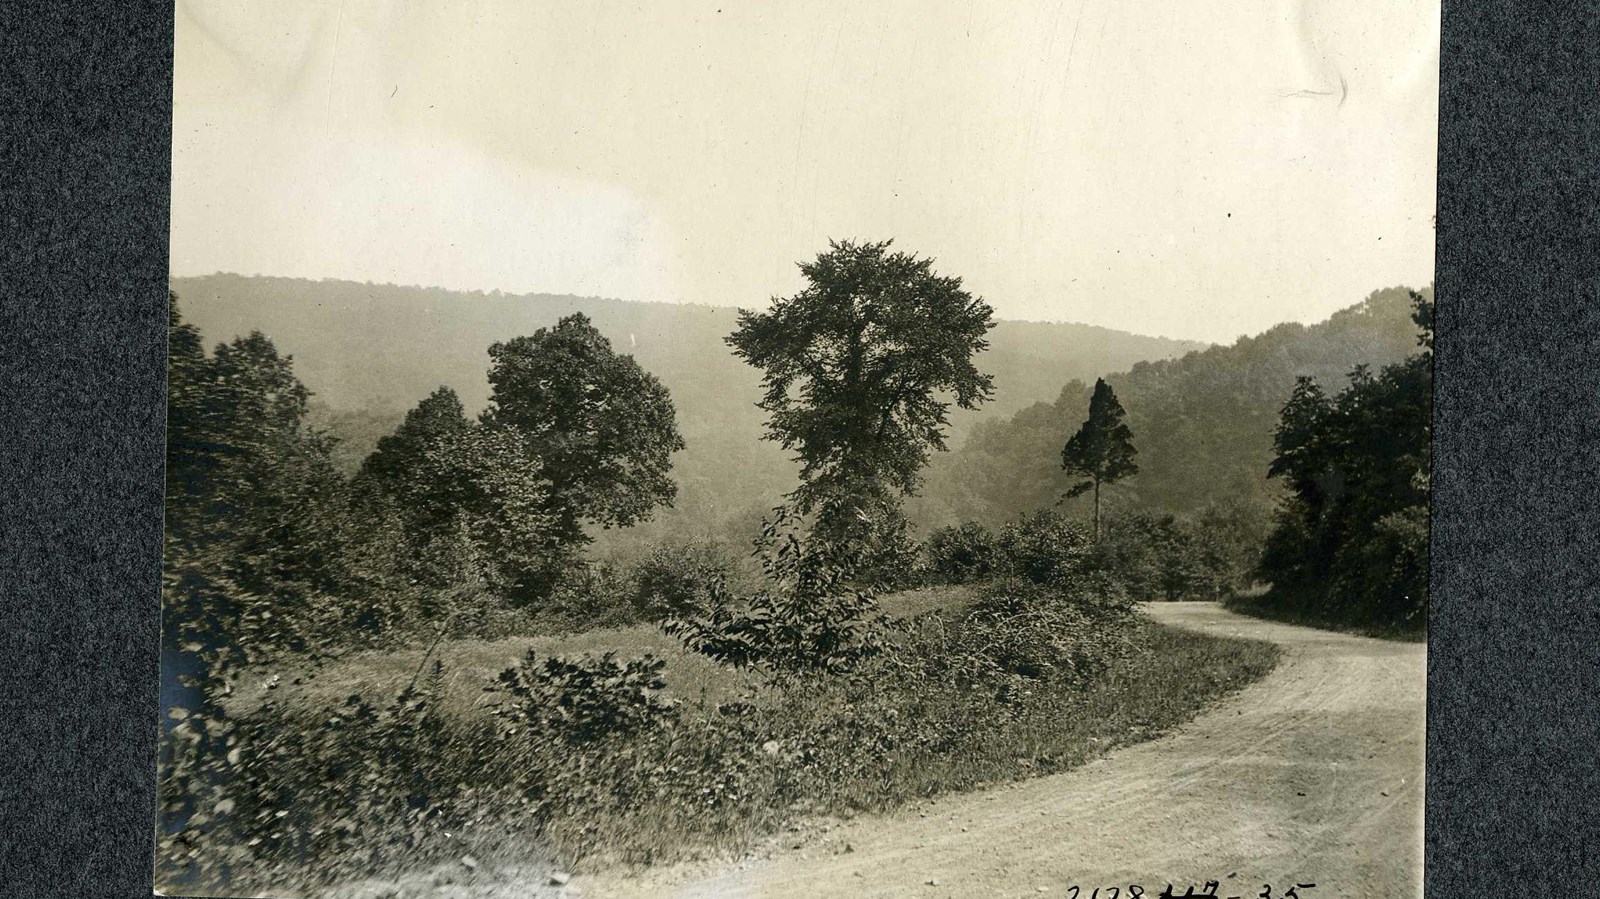 Black and white of curving road with trees and grass on both sides, mountains of trees in distance